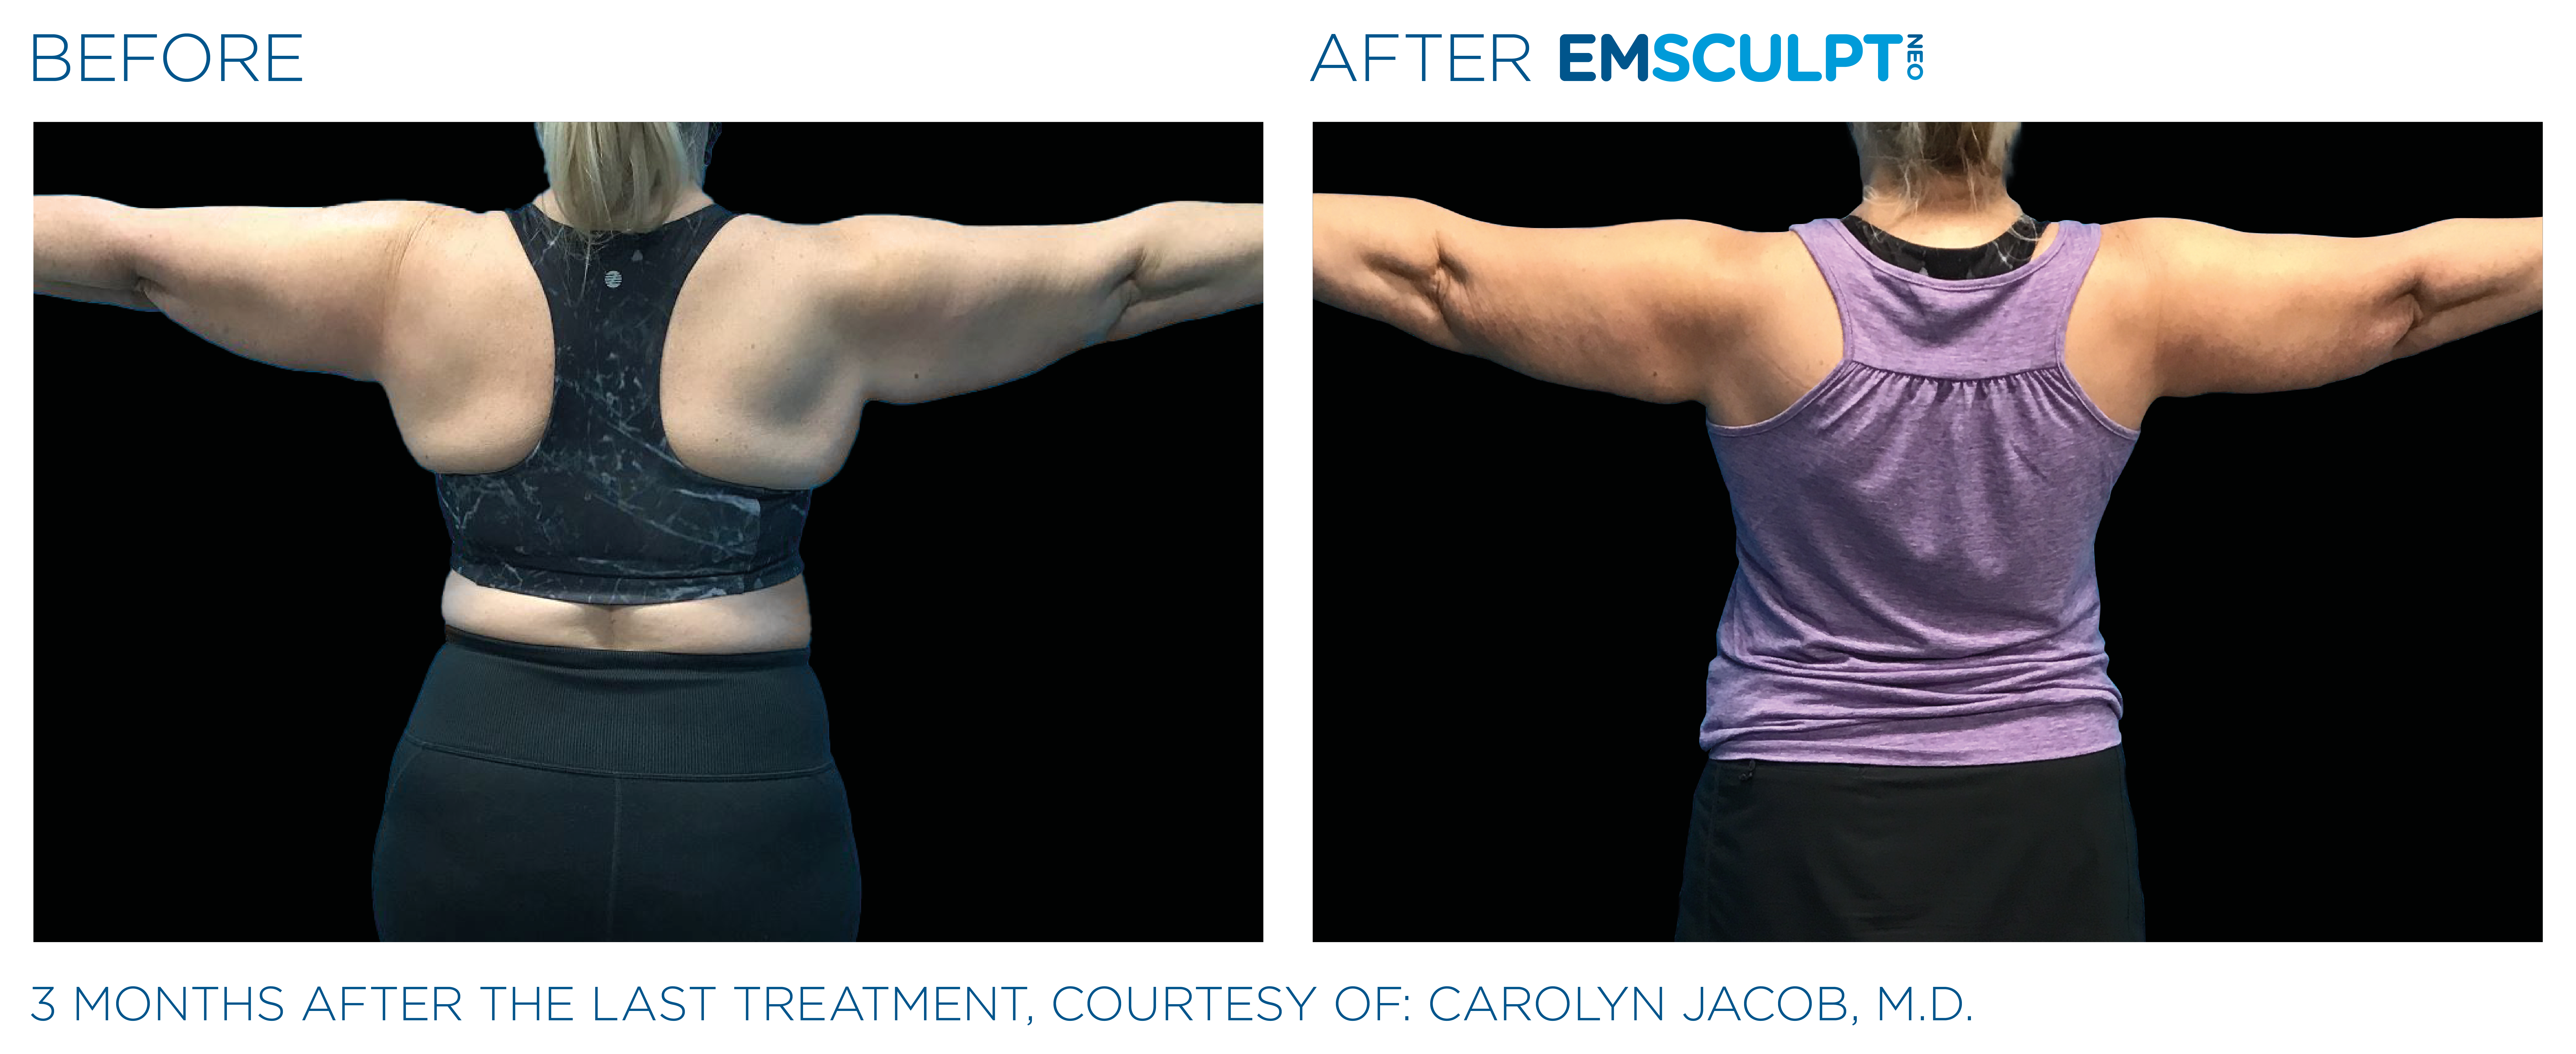 Before and after picture showing 3 months after the last Emsculpt Neo treatment, courtesy of Carolyn Jacob, M.D.